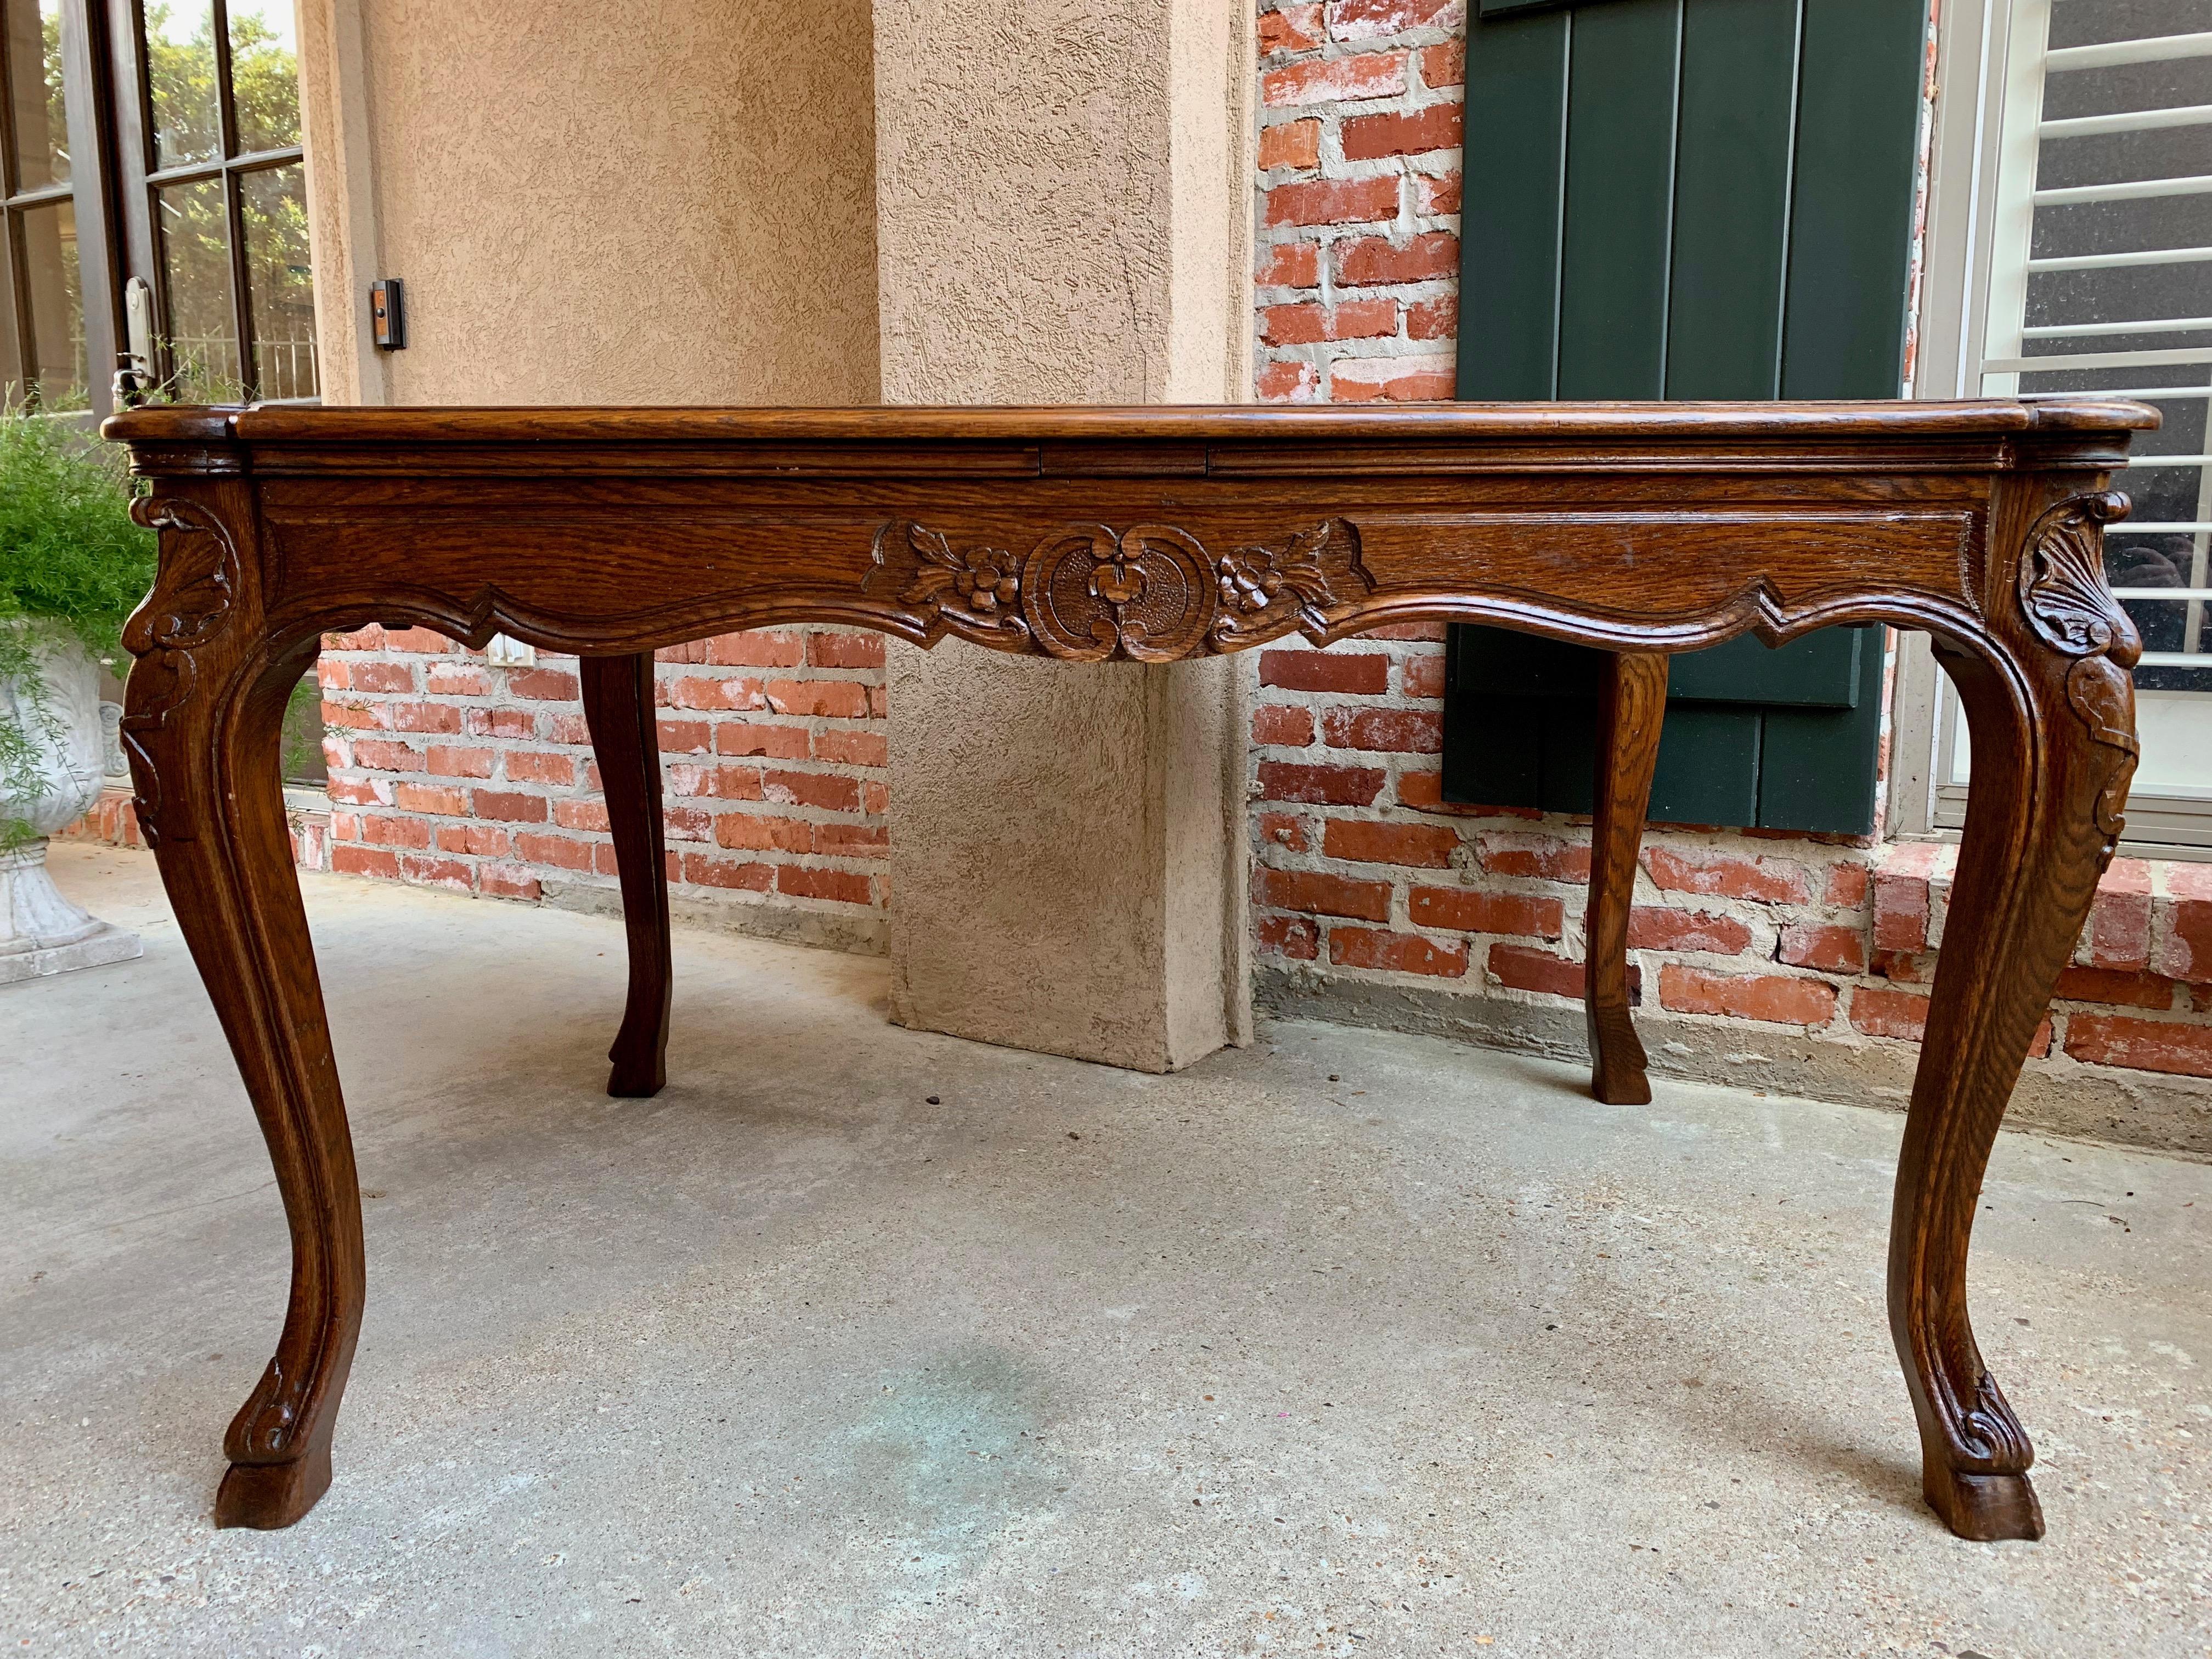 Direct from France, a lovely antique French carved oak dining table with a gorgeous profile!
~Heavily carved cabriole legs and ram’s hoof feet~
~ Parquet beveled edge serpentine oak top~
~Carved apron, elaborately carved on all sides~
~Excellent